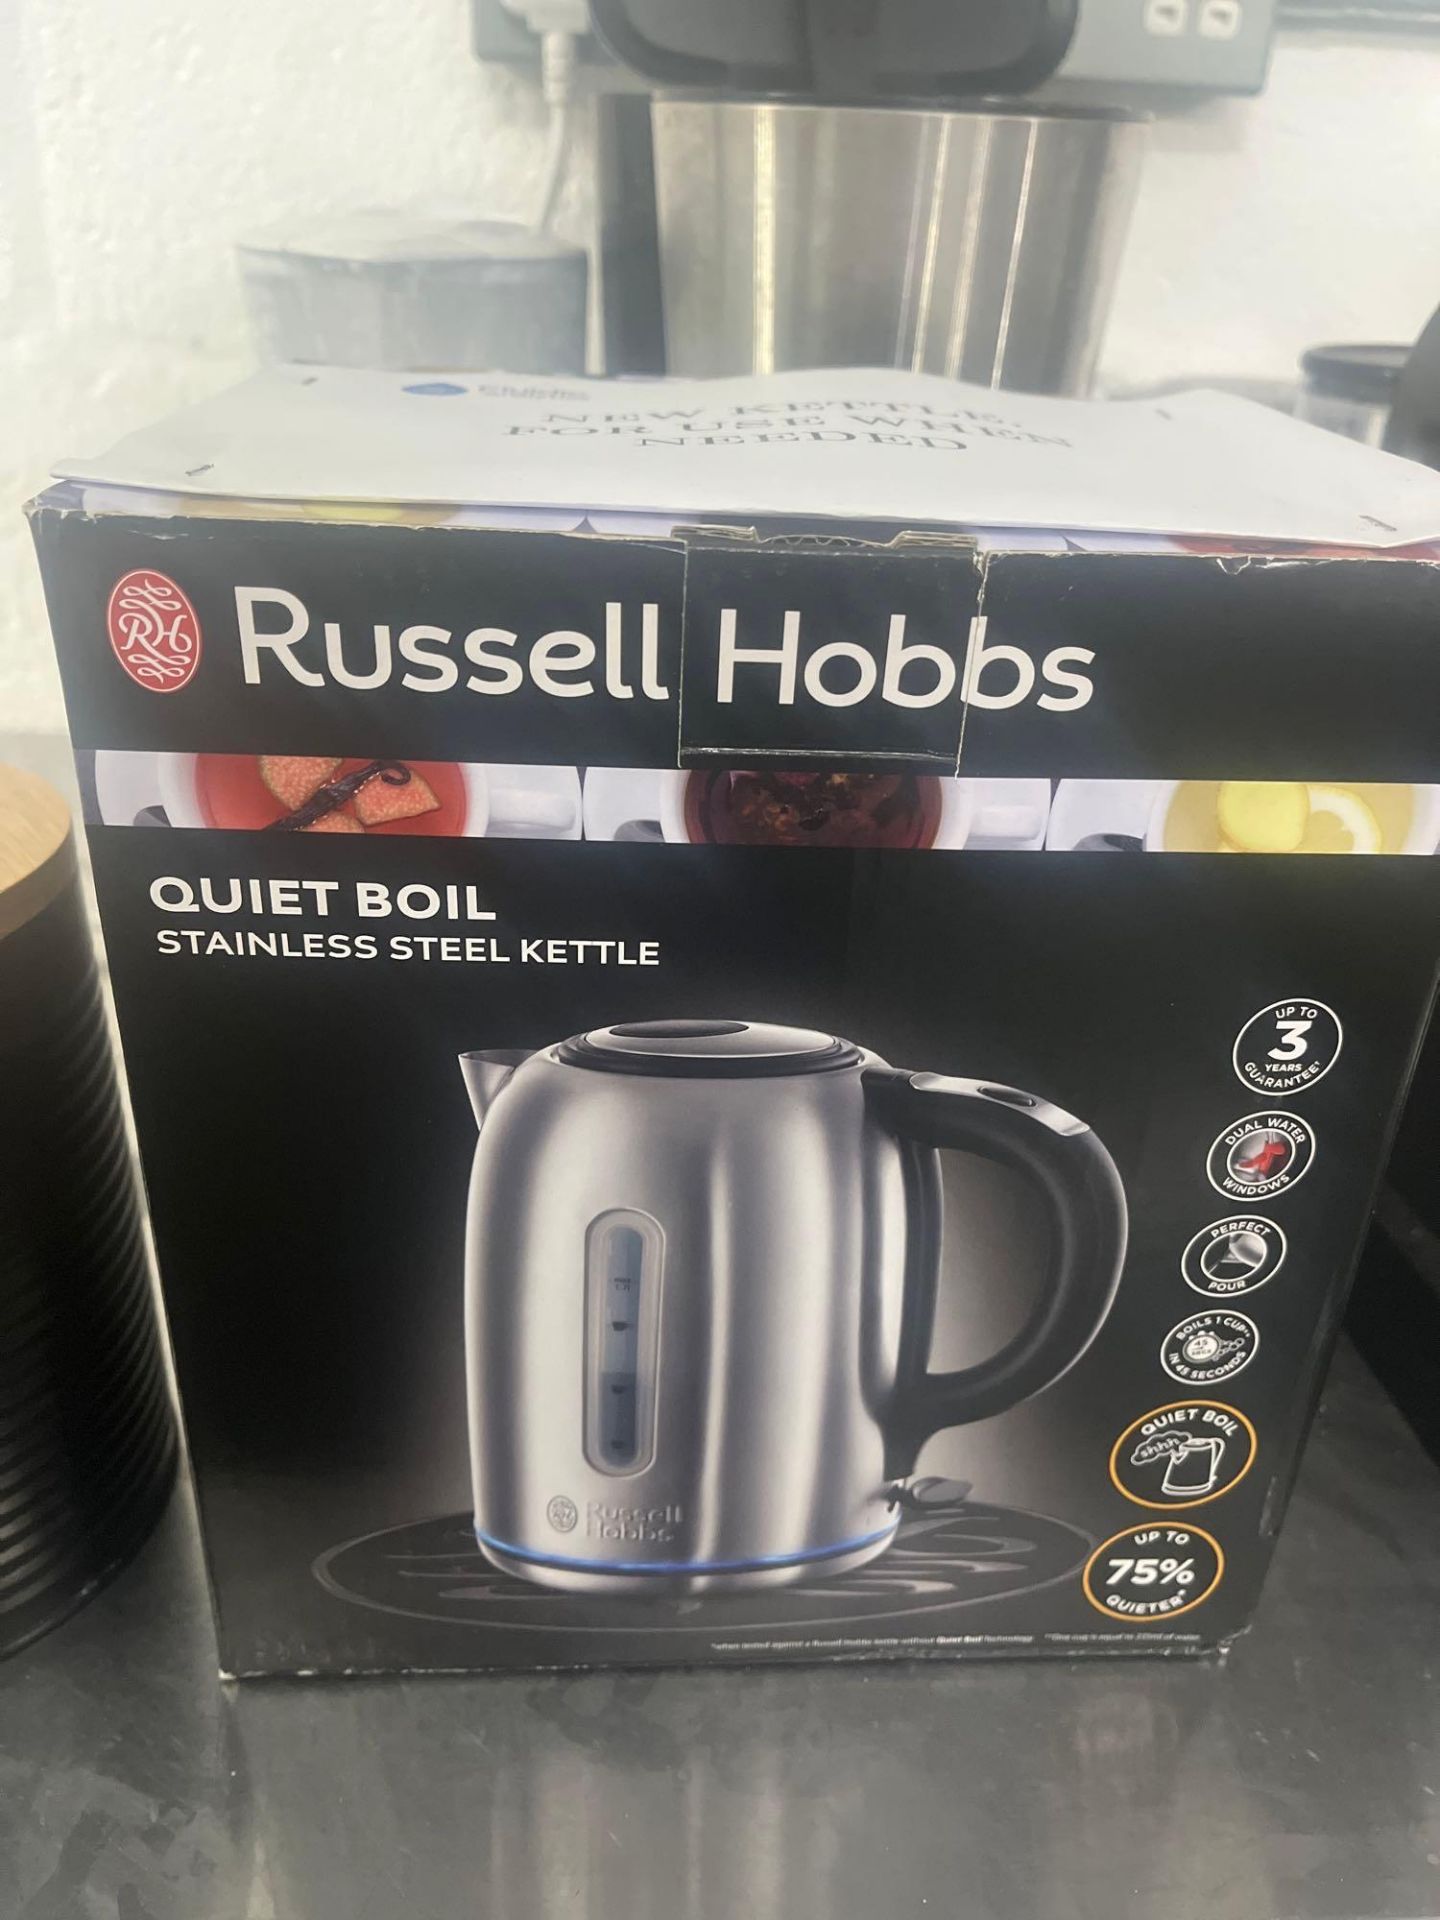 Krups coffee machine, Russell Hobbs stainless steel kettle etc. (as lotted) - Image 4 of 5